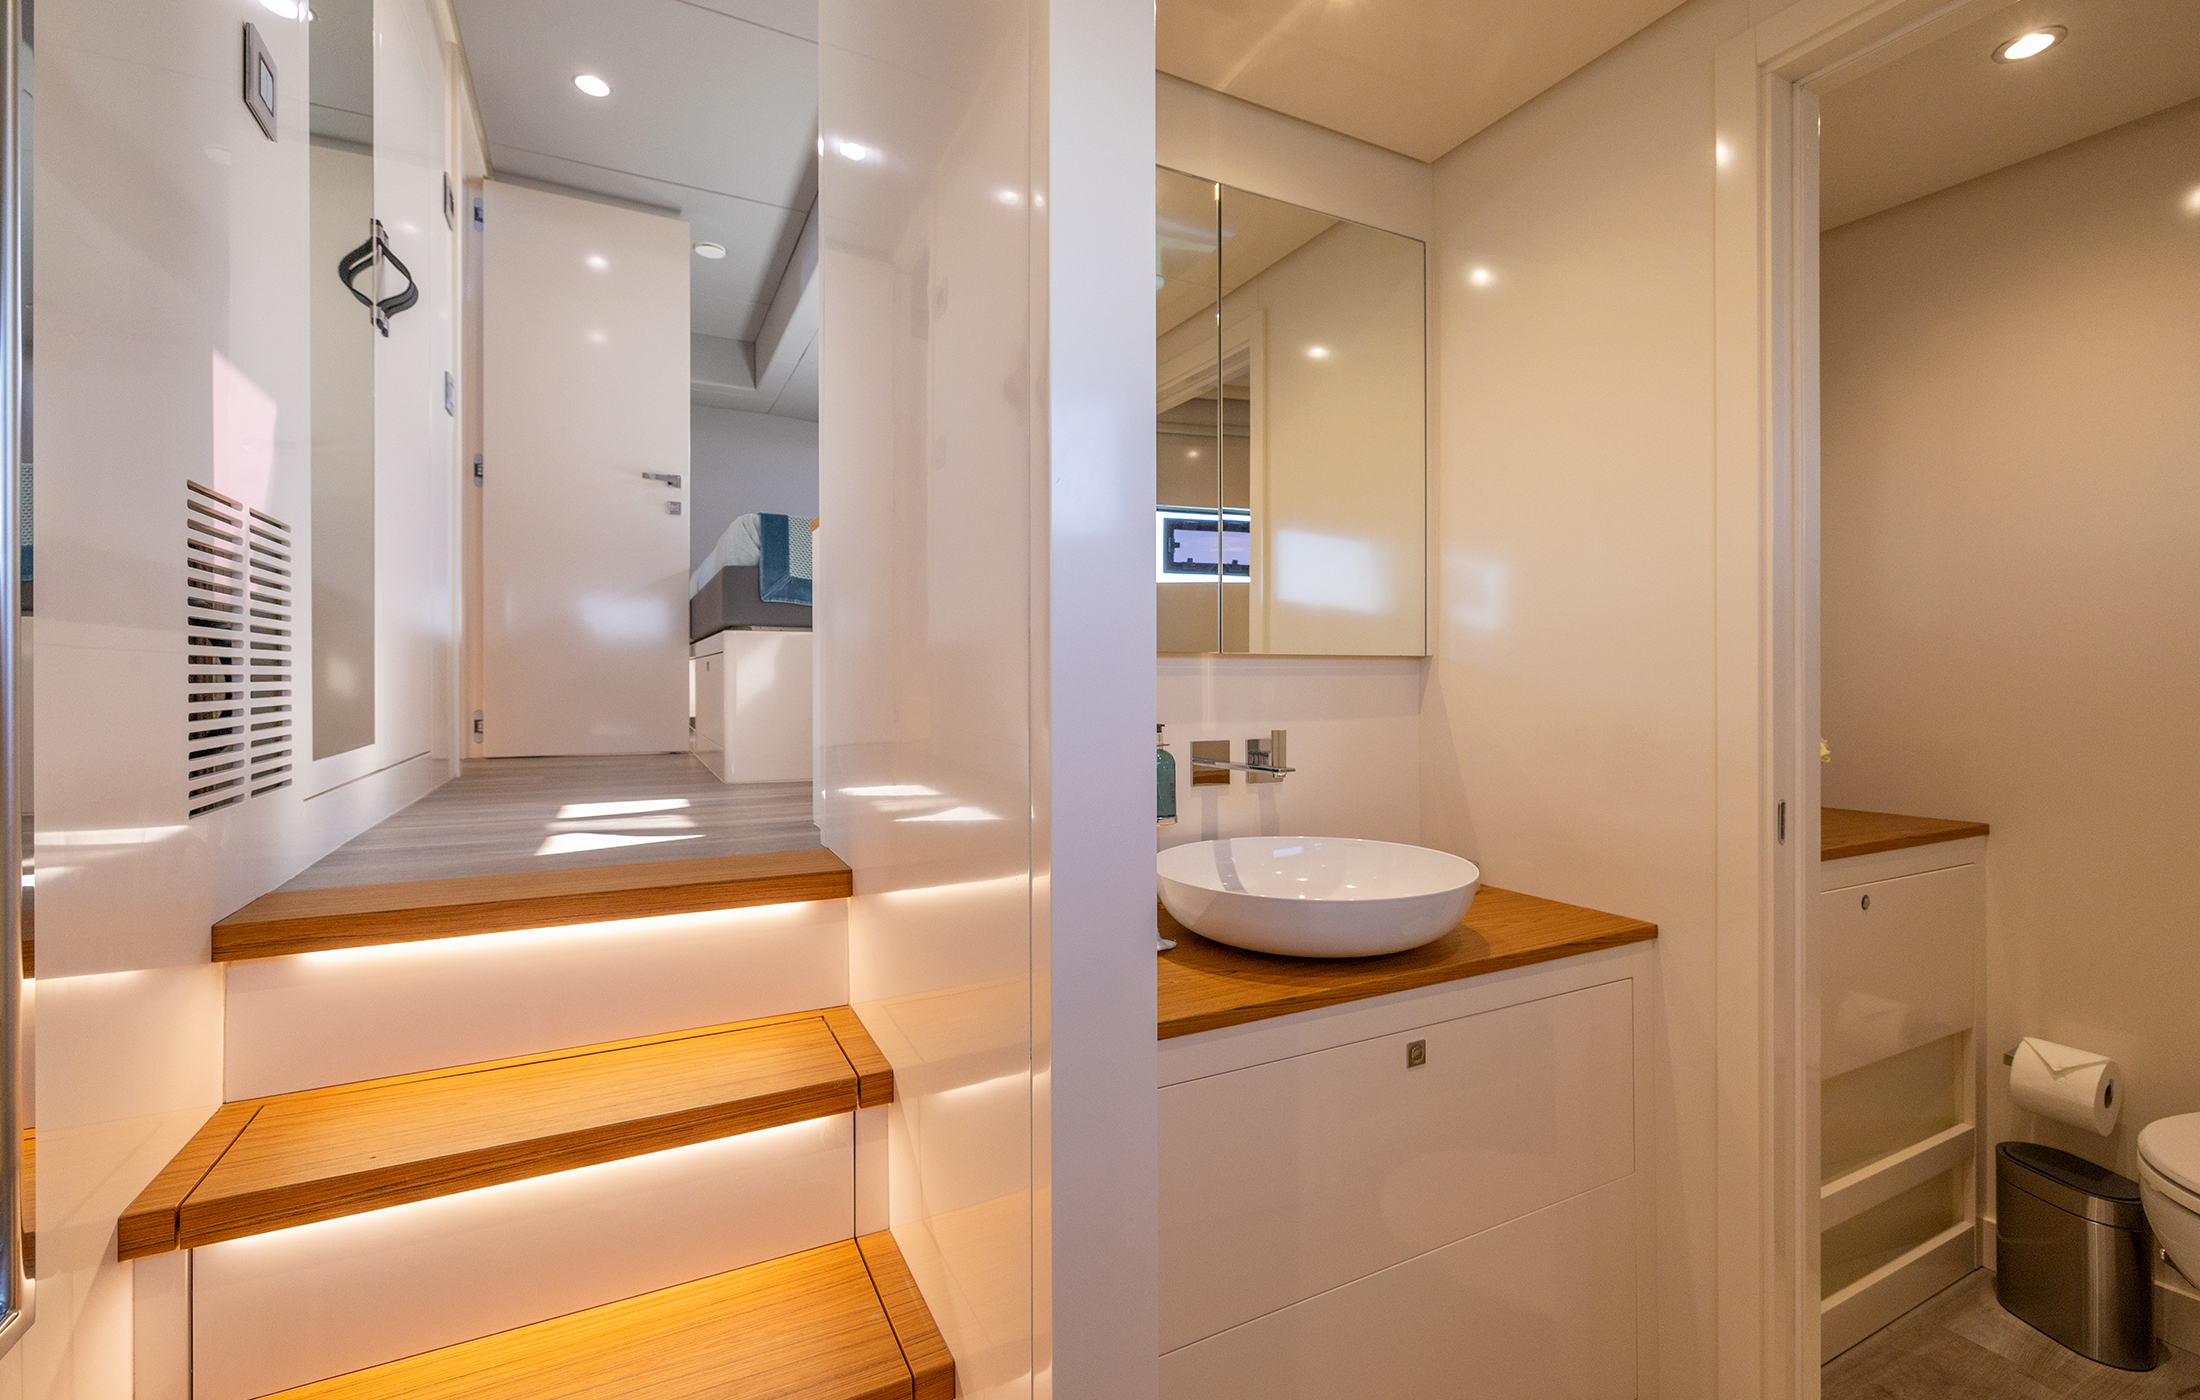 Large bathroom in the main cabin of a yachts